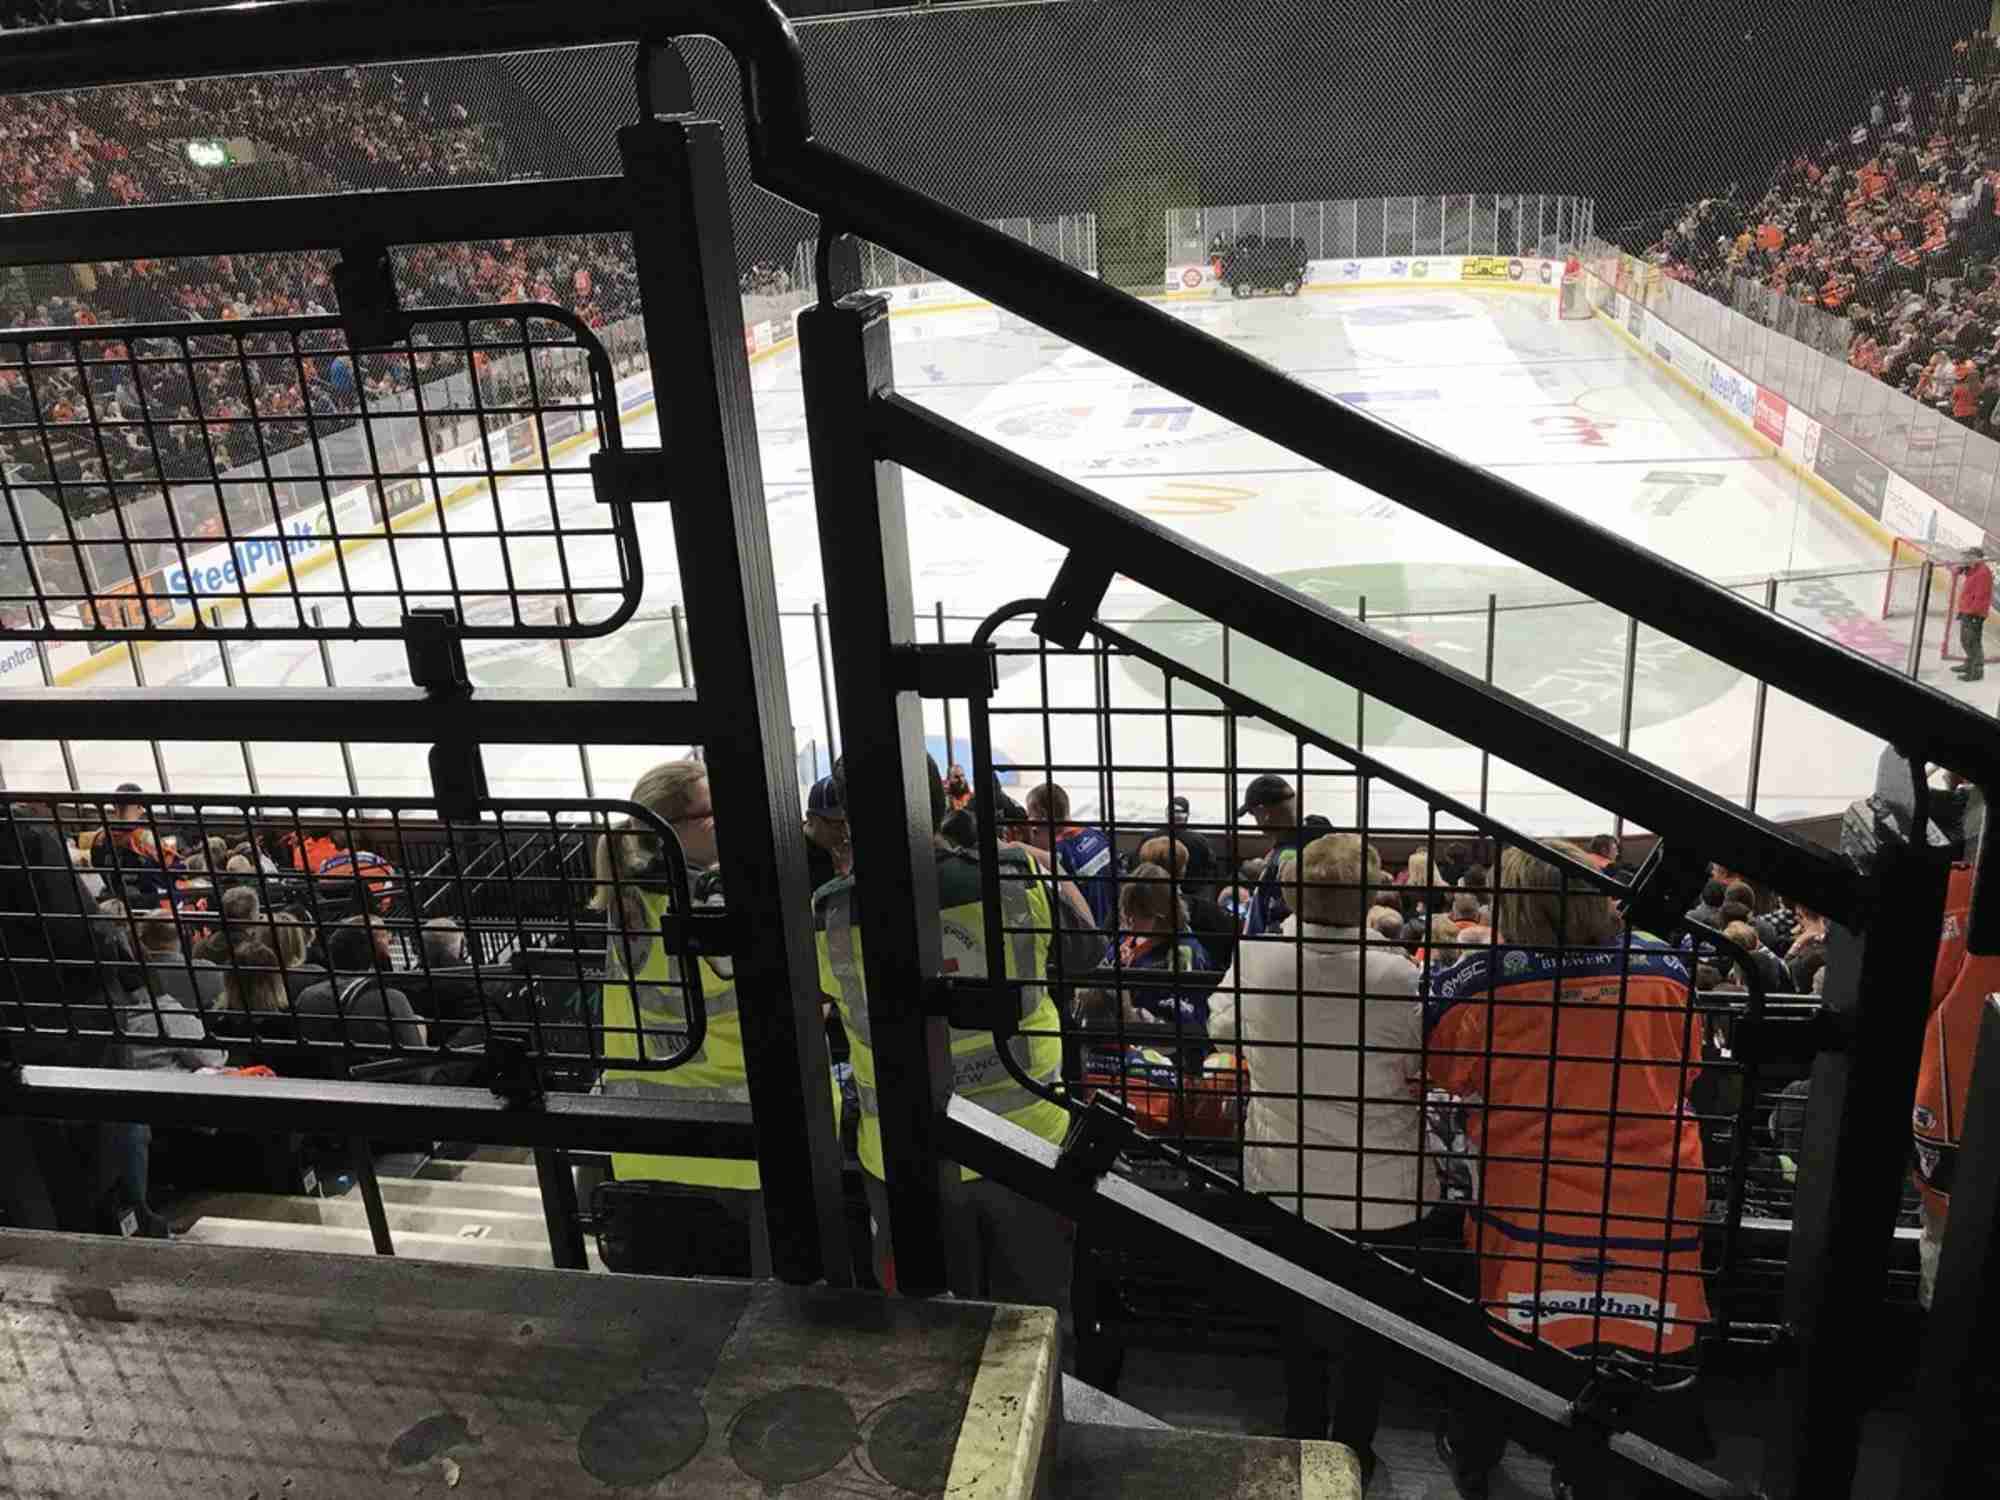 View of Ice Hockey at Utilita Arena Sheffield from Seat Block 211